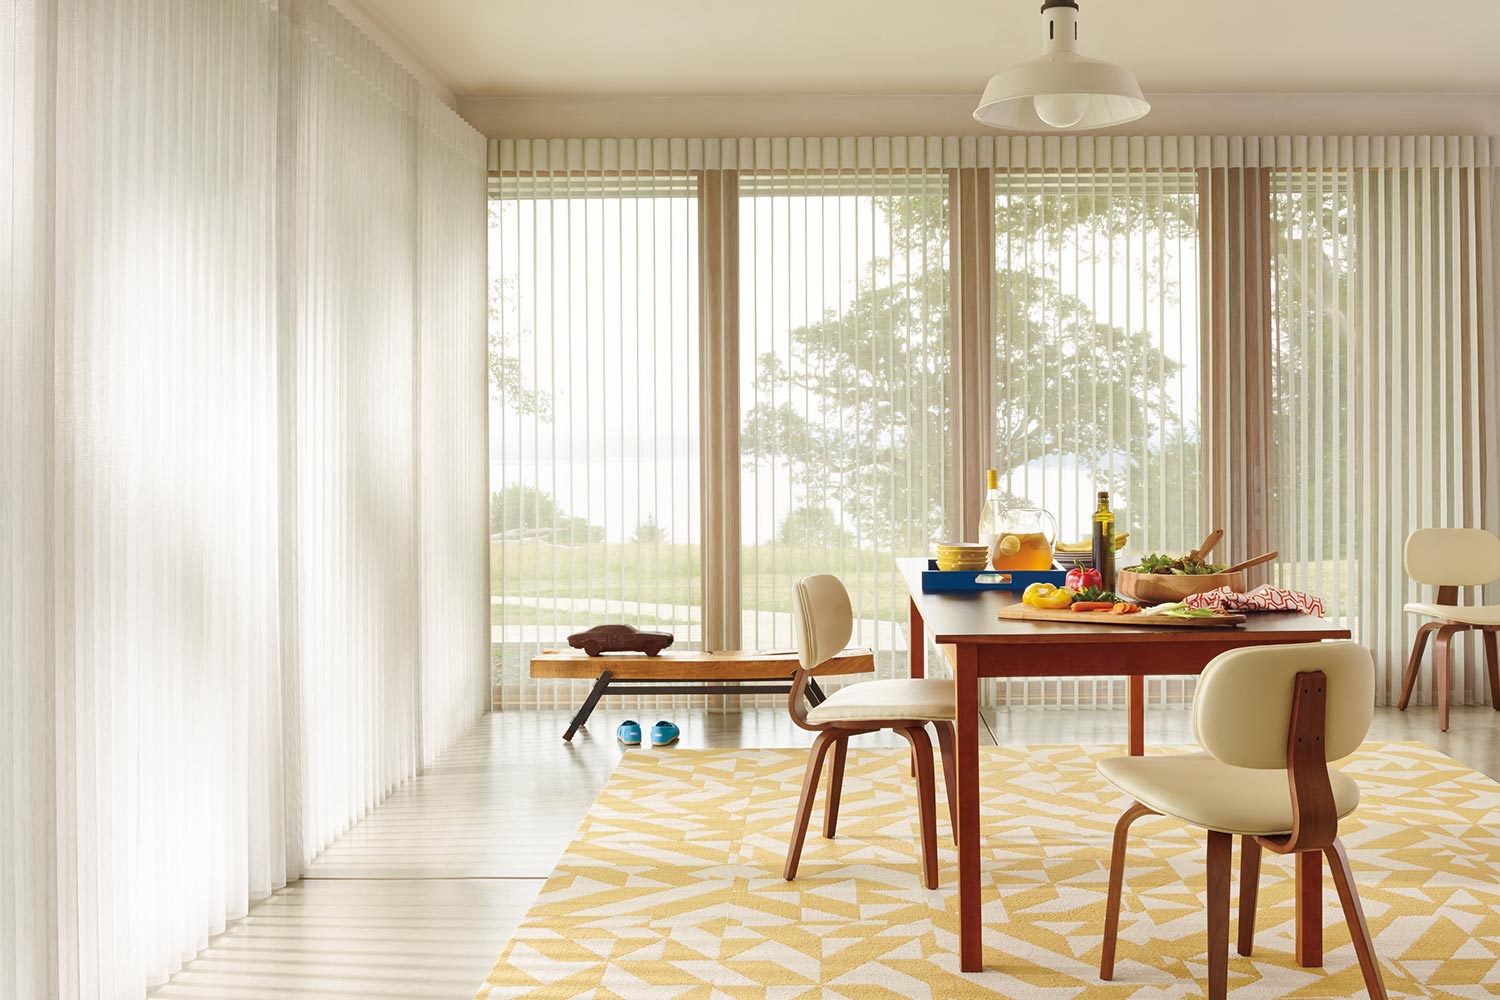 What’s roller blinds?